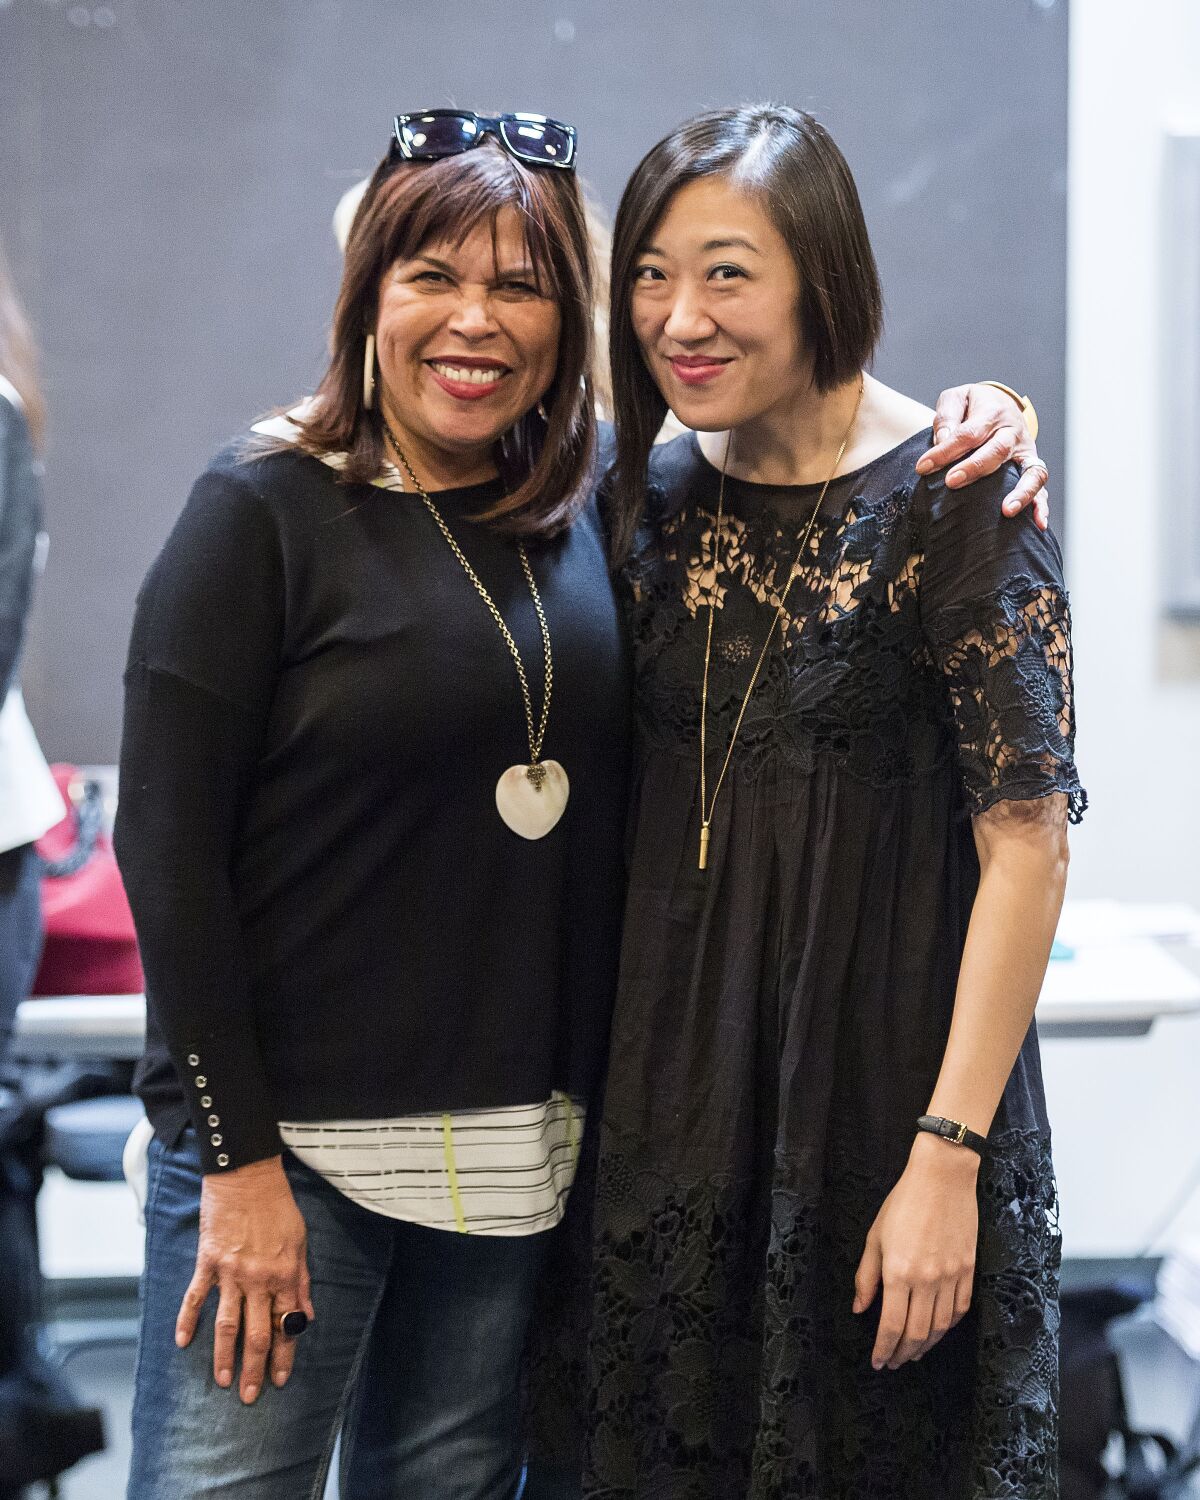 Diane Rodriguez and playwright Young Jean Lee during rehearsal for “Straight White Men” at Center Theatre Group's Mark Taper Forum in 2015.